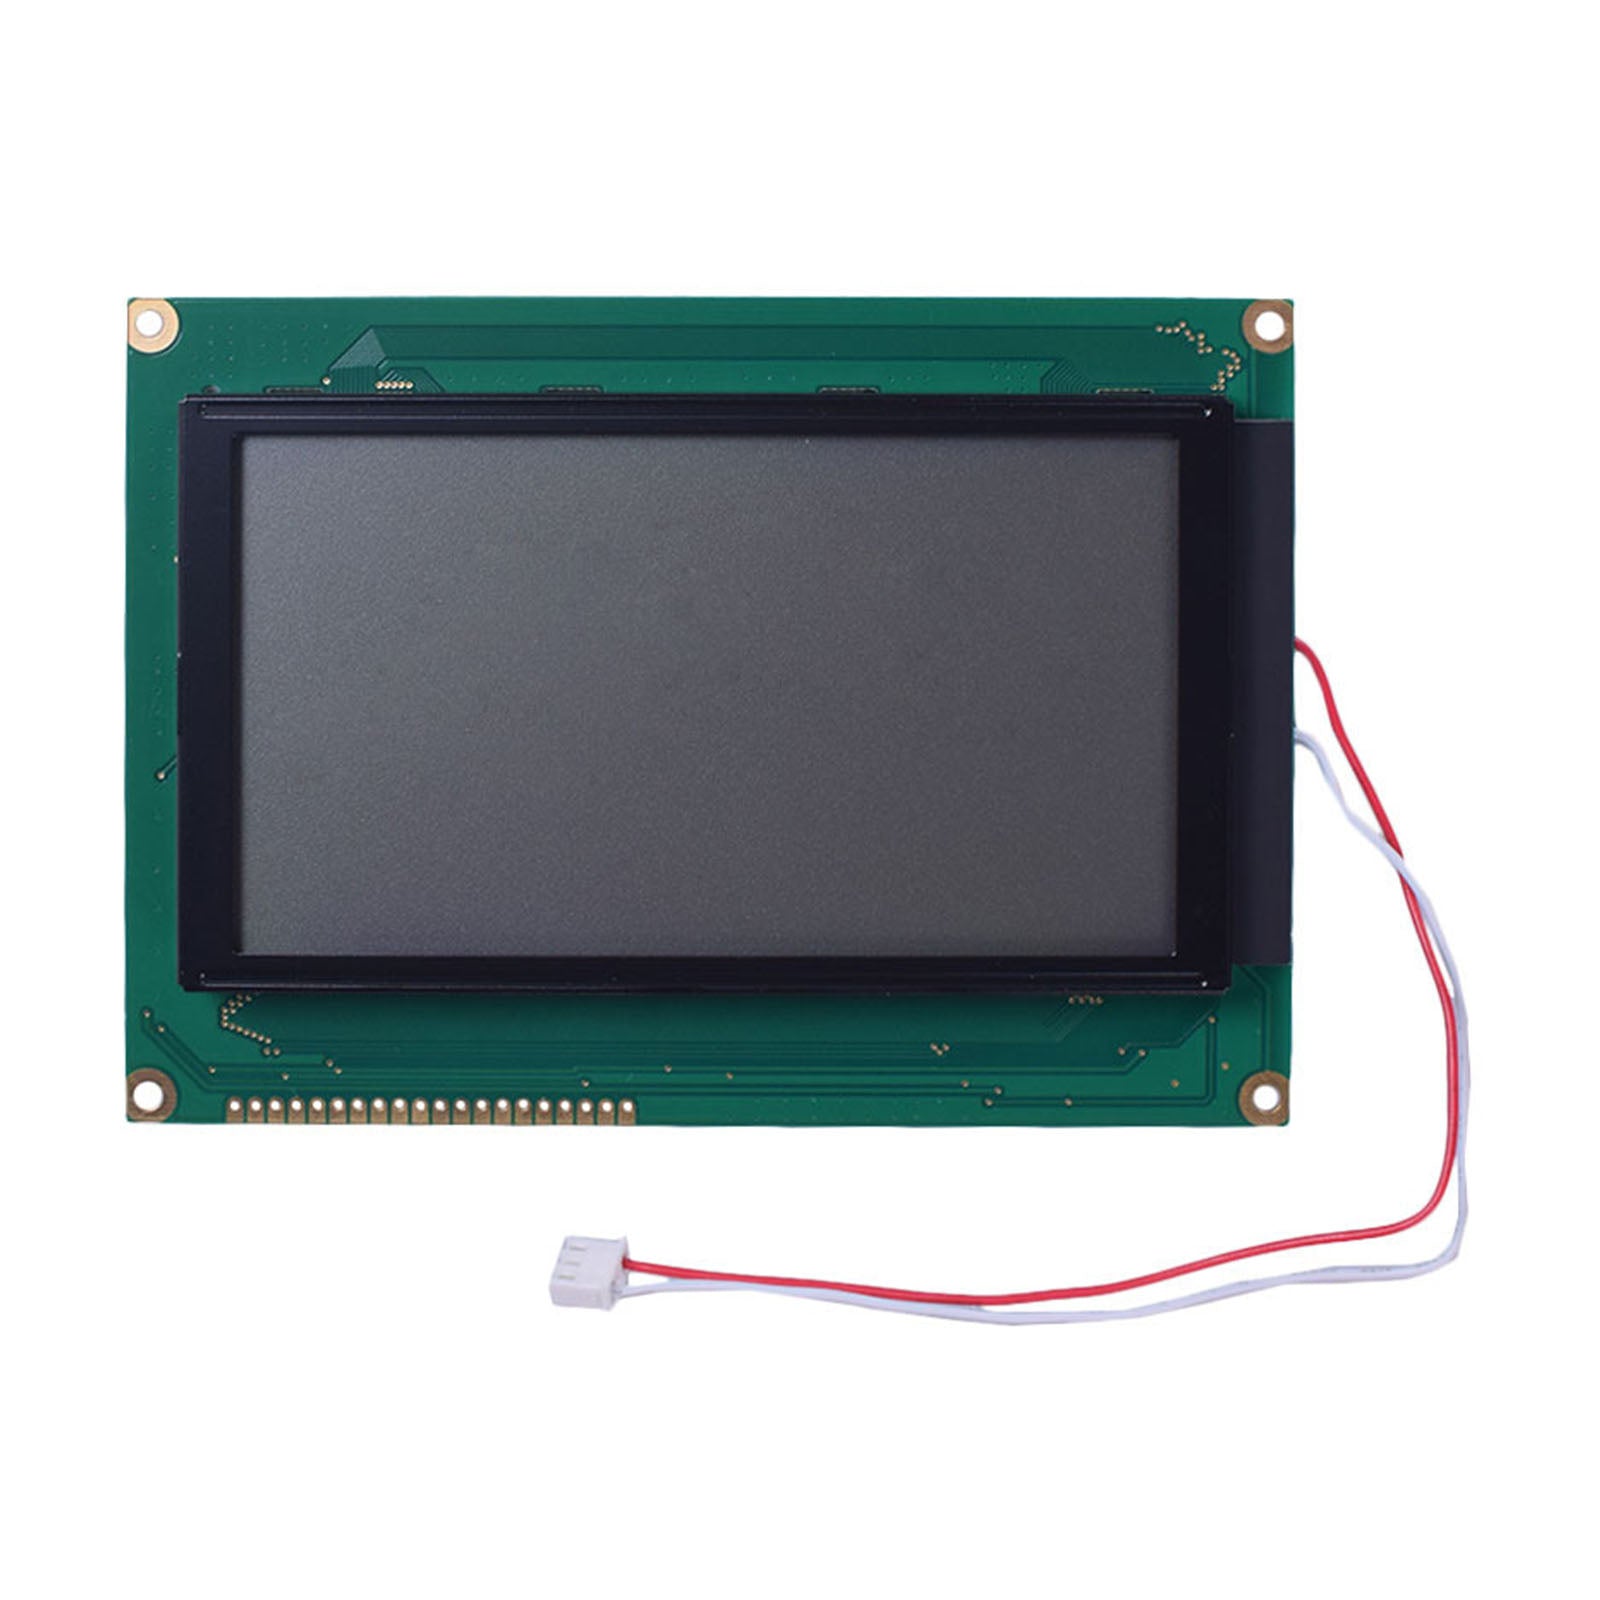 5.15-inch 240x128 Graphic LCD display module with MCU interface